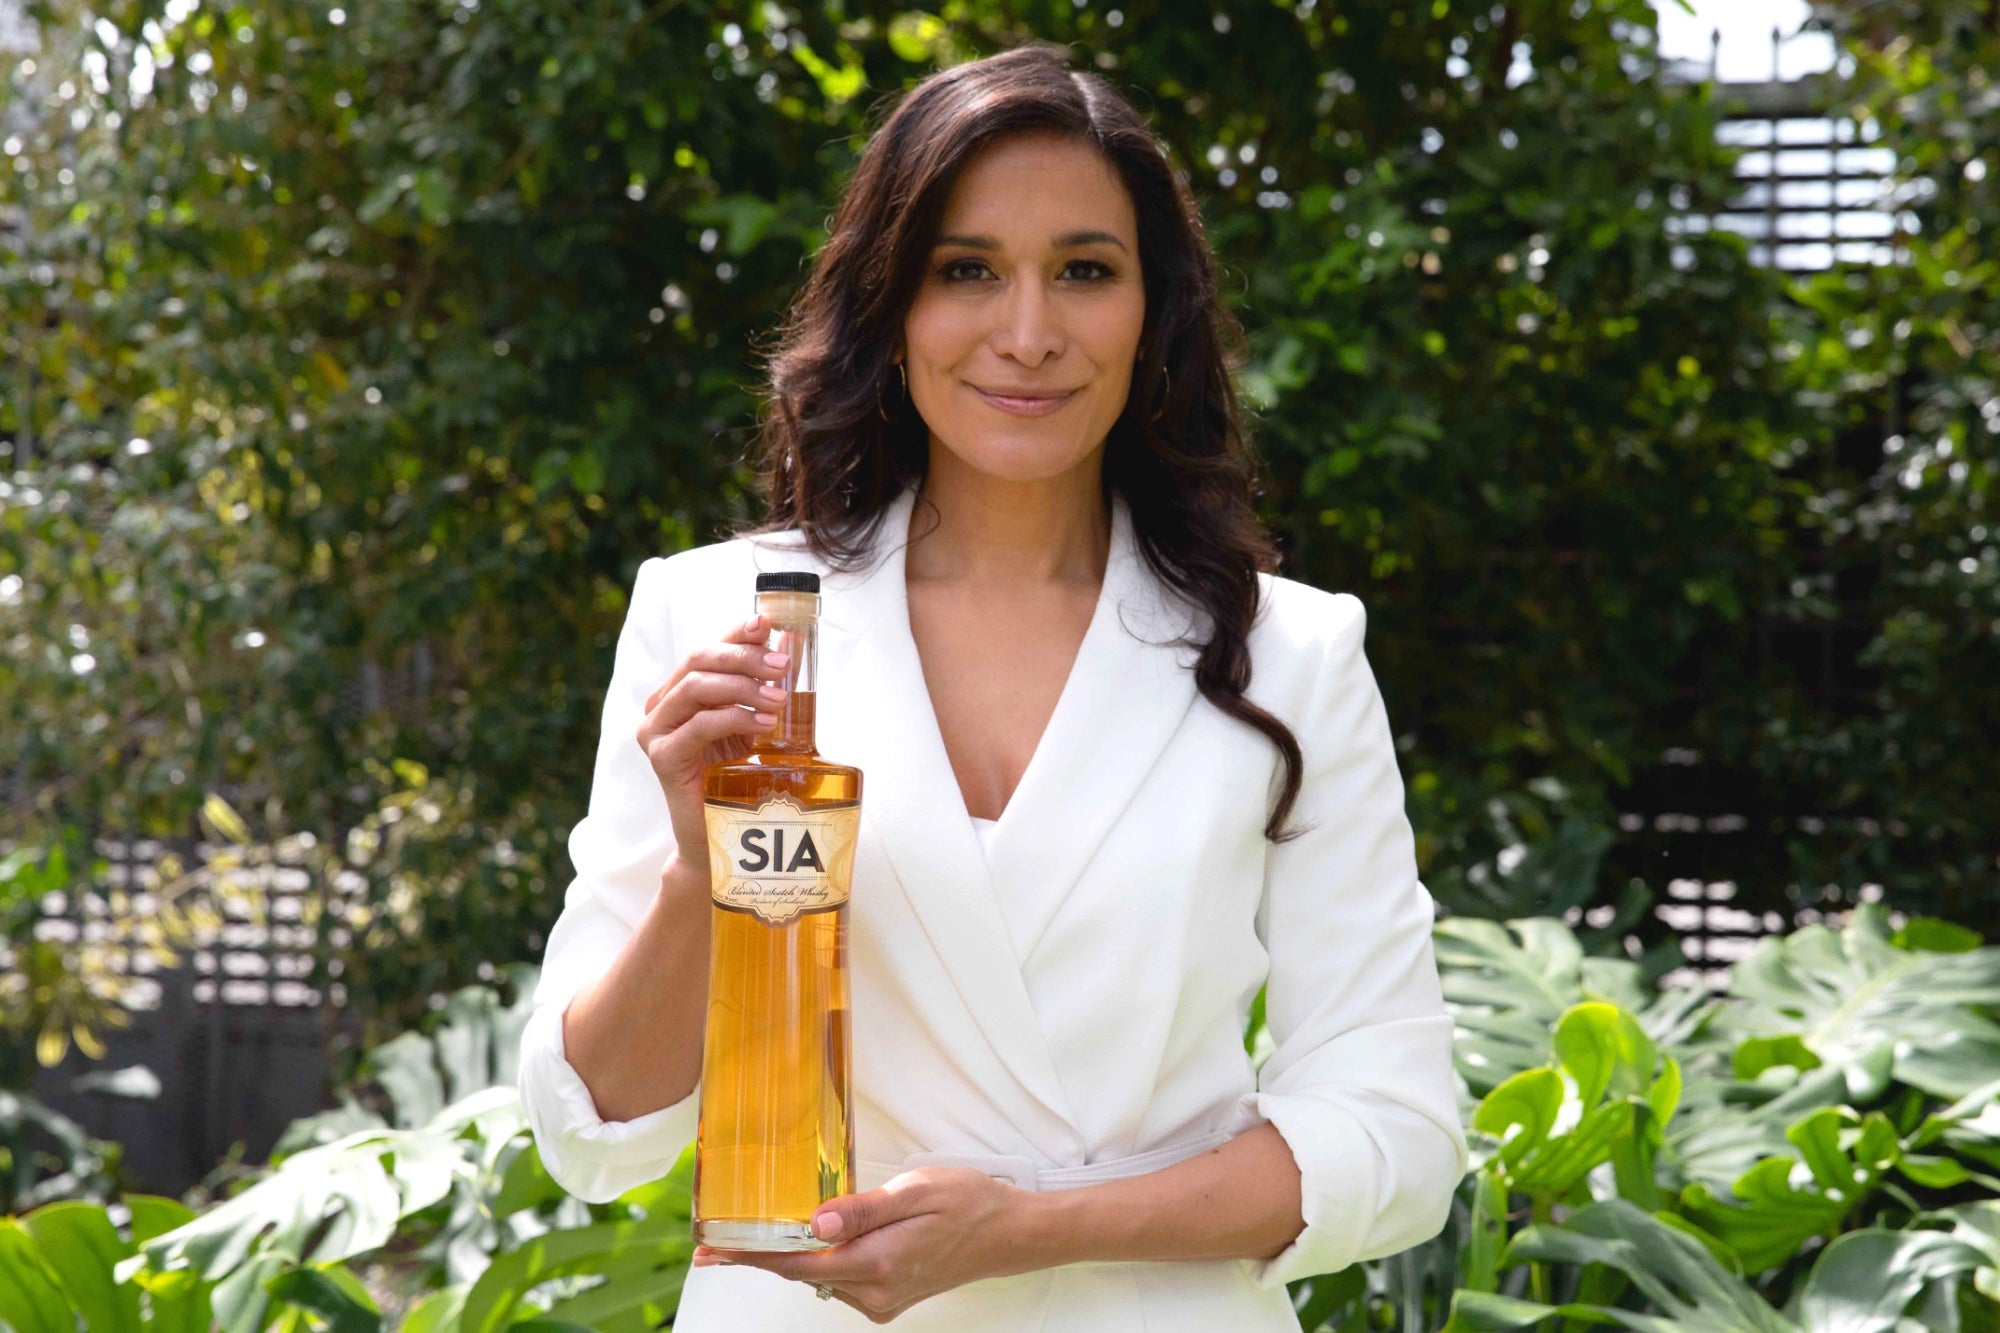 This Entrepreneur Crowdfunded Her Scotch Whisky on Kickstarter. Now, She's Giving Back $250,000 in Grants to Minority Entrepreneurs … and Yes, You Can Apply for One.